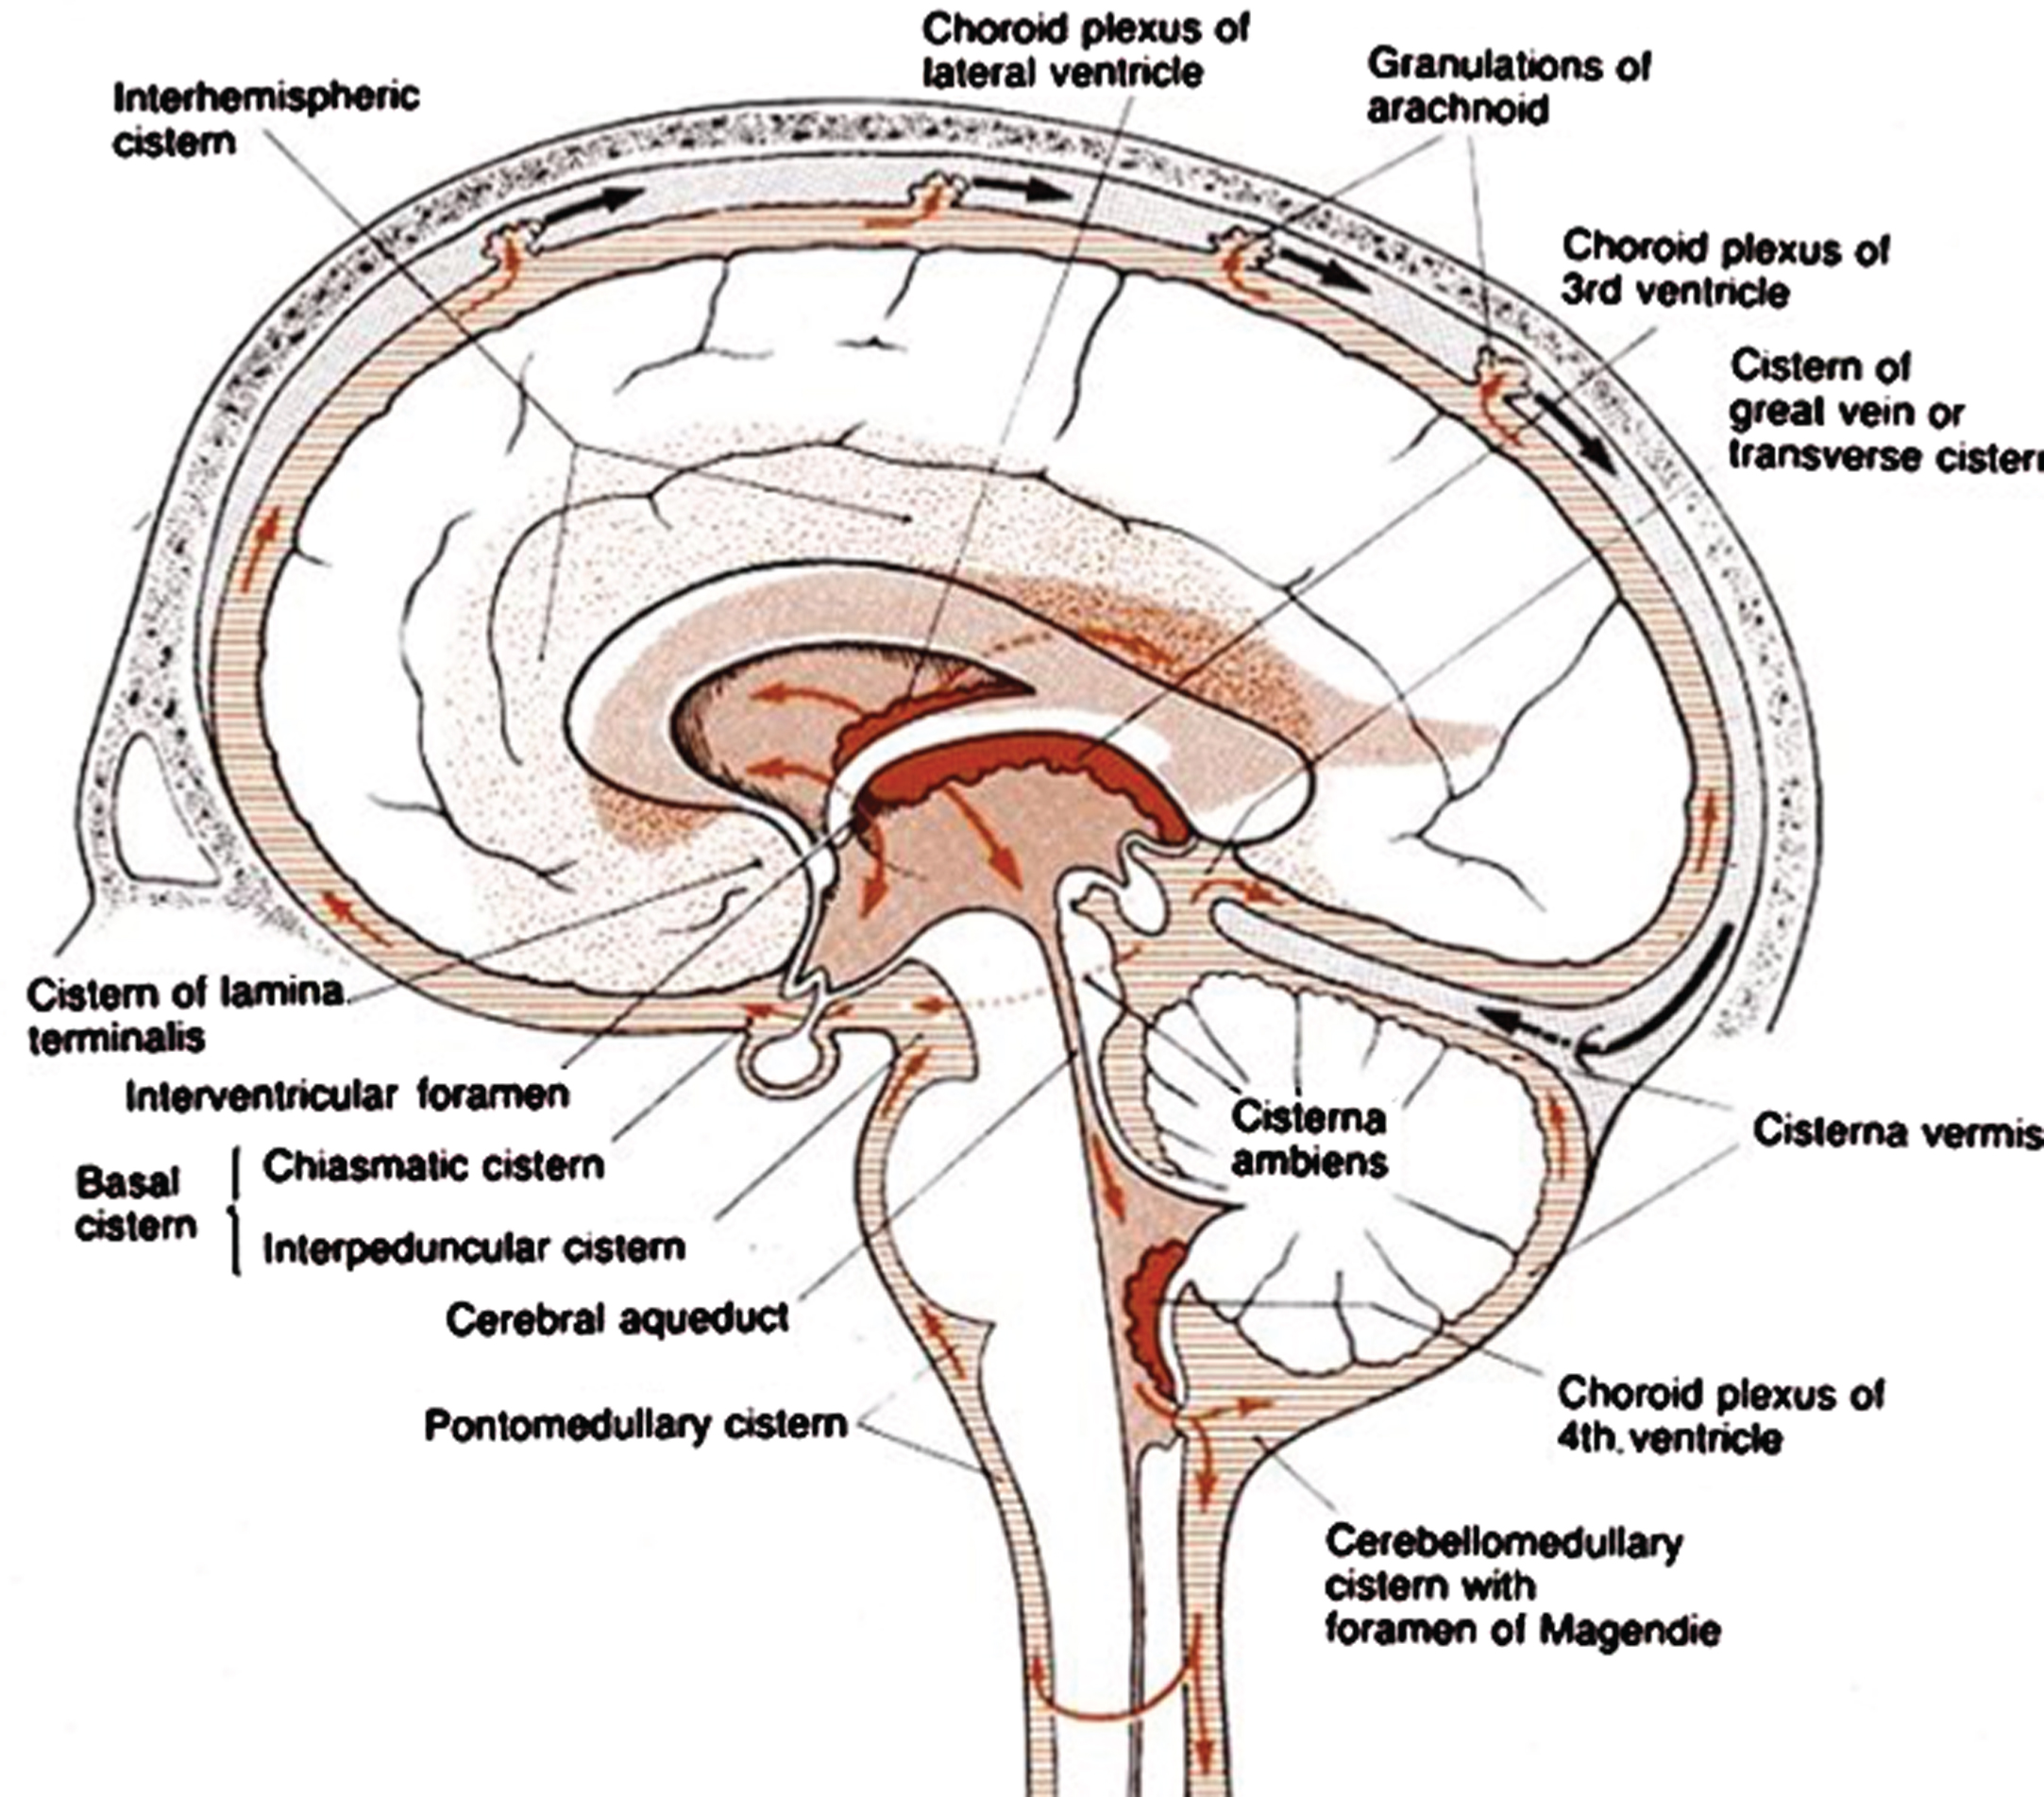 Locations of the major brain CSF-filled cisterns, showing also all CSF motion paths (arrows) of the glymphatic system [16] with the exception of the part that includes the entries and exits to the cortex parenchyma. Particular attention is directed to the “basal cistern” which include the chiasmatic and interpeduncular cisterns (see text for discussion). These are upstream in the CSF motion path of the Aβ pathology in the orbitofrontal cortex, a lower portion of the frontal cortex, which also interfaces with the cistern of lamina terminalis. Source: https://ranzcrpart1.fandom.com/Fandom communities (known as “wikis”) is licensed under the Creative Commons License 3.0 (Unported) (CC-BY-SA).